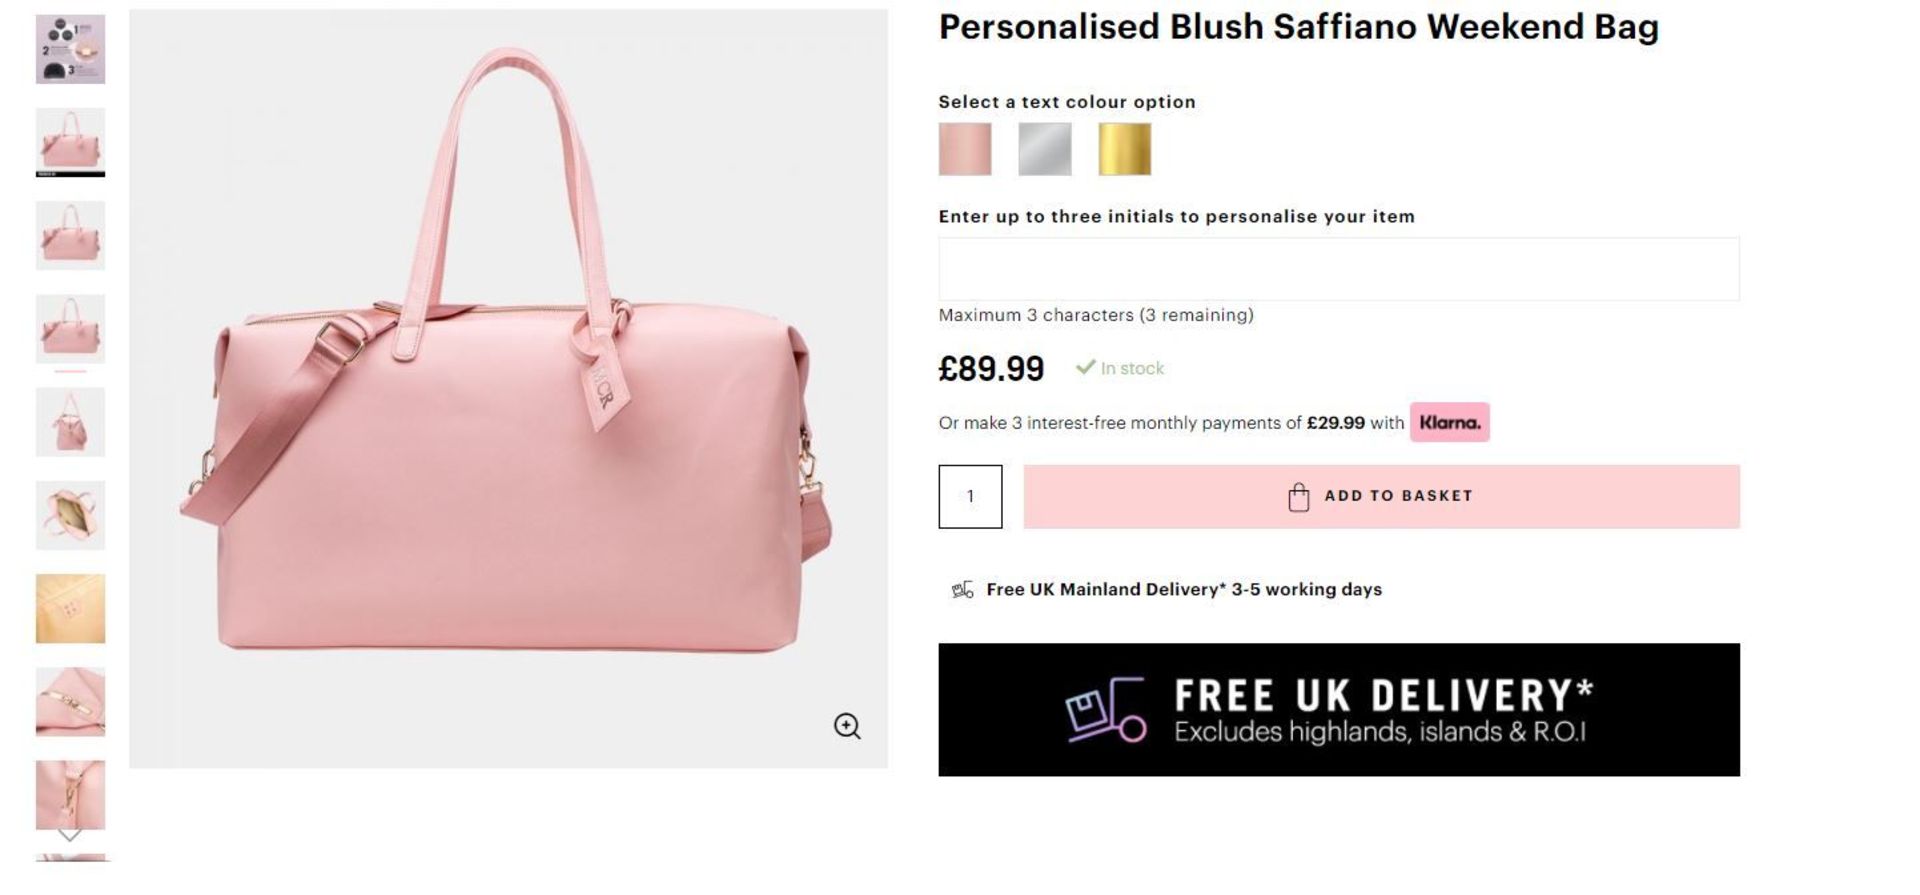 2 x NEW PACKAGED Beauti Saffiano Weekend Holdall. Blush. RRP £89.99 each. Note: Item is not